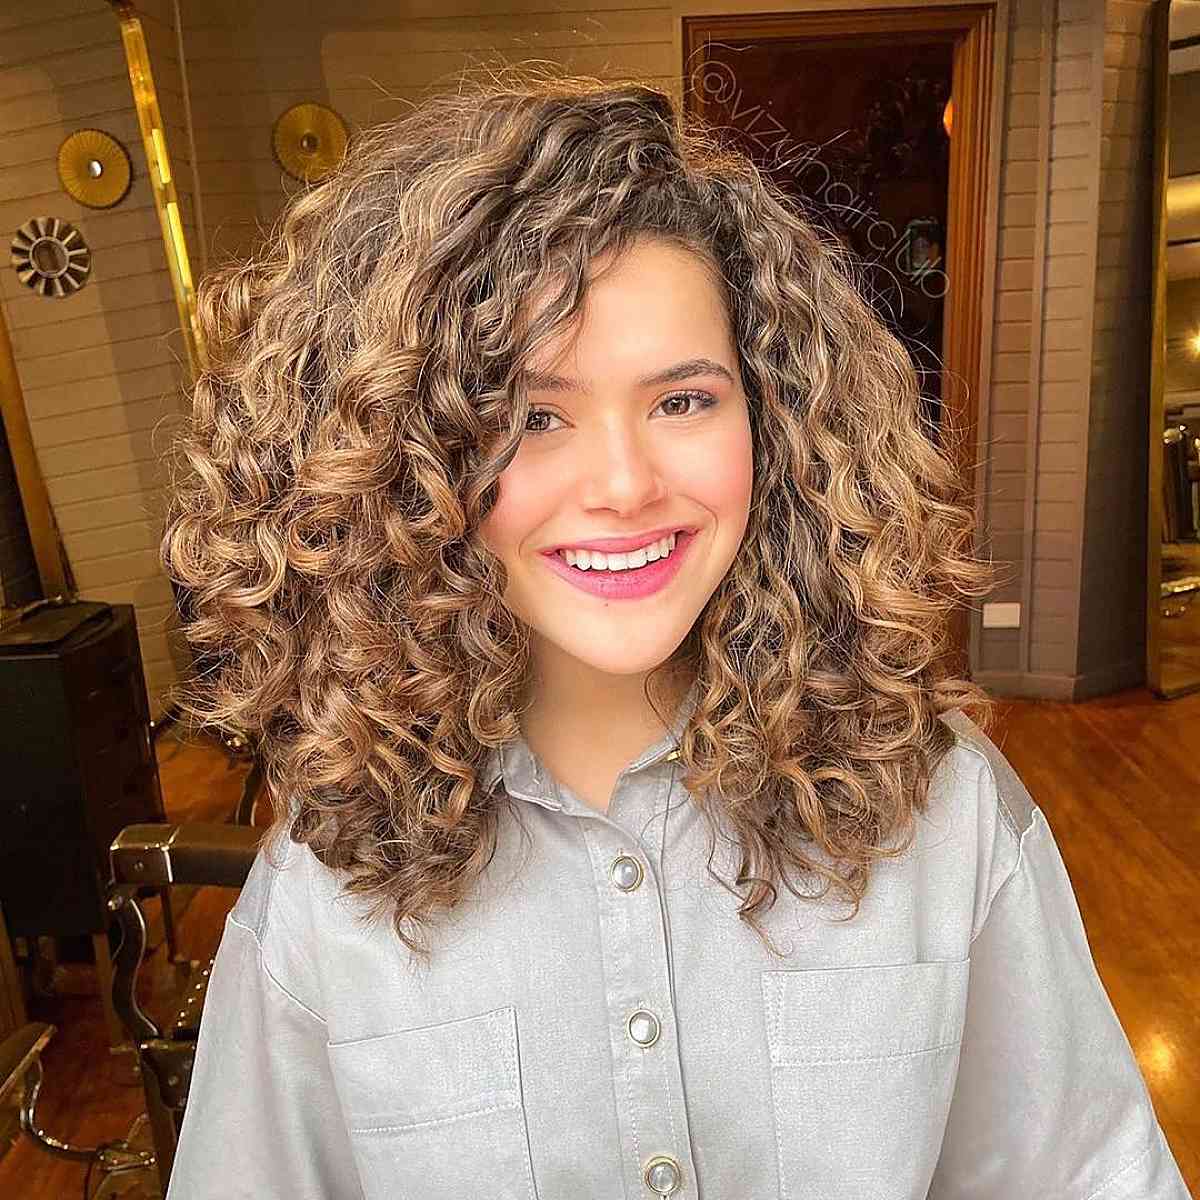 65 Best Shoulder Length Curly Hair Cuts & Styles in 2023